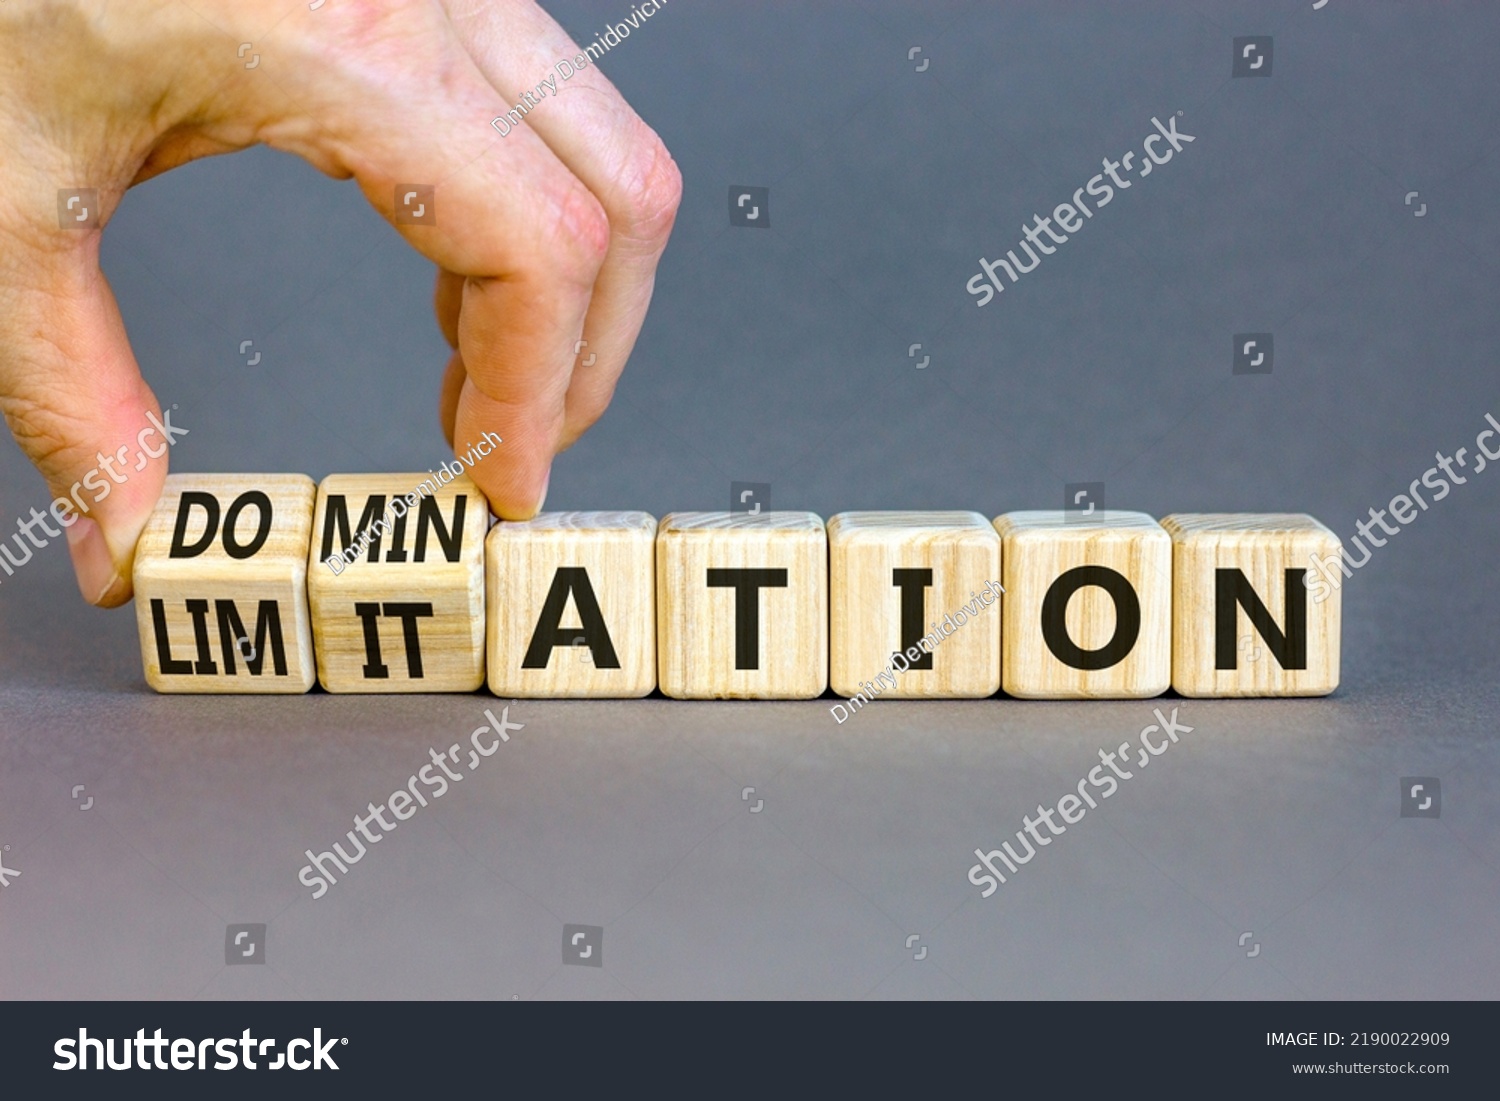 Domination or limitation symbol. Businessman turns cubes, changes the word domination to limitation. Beautiful grey table, grey background, copy space. Business, domination or limitation concept. #2190022909